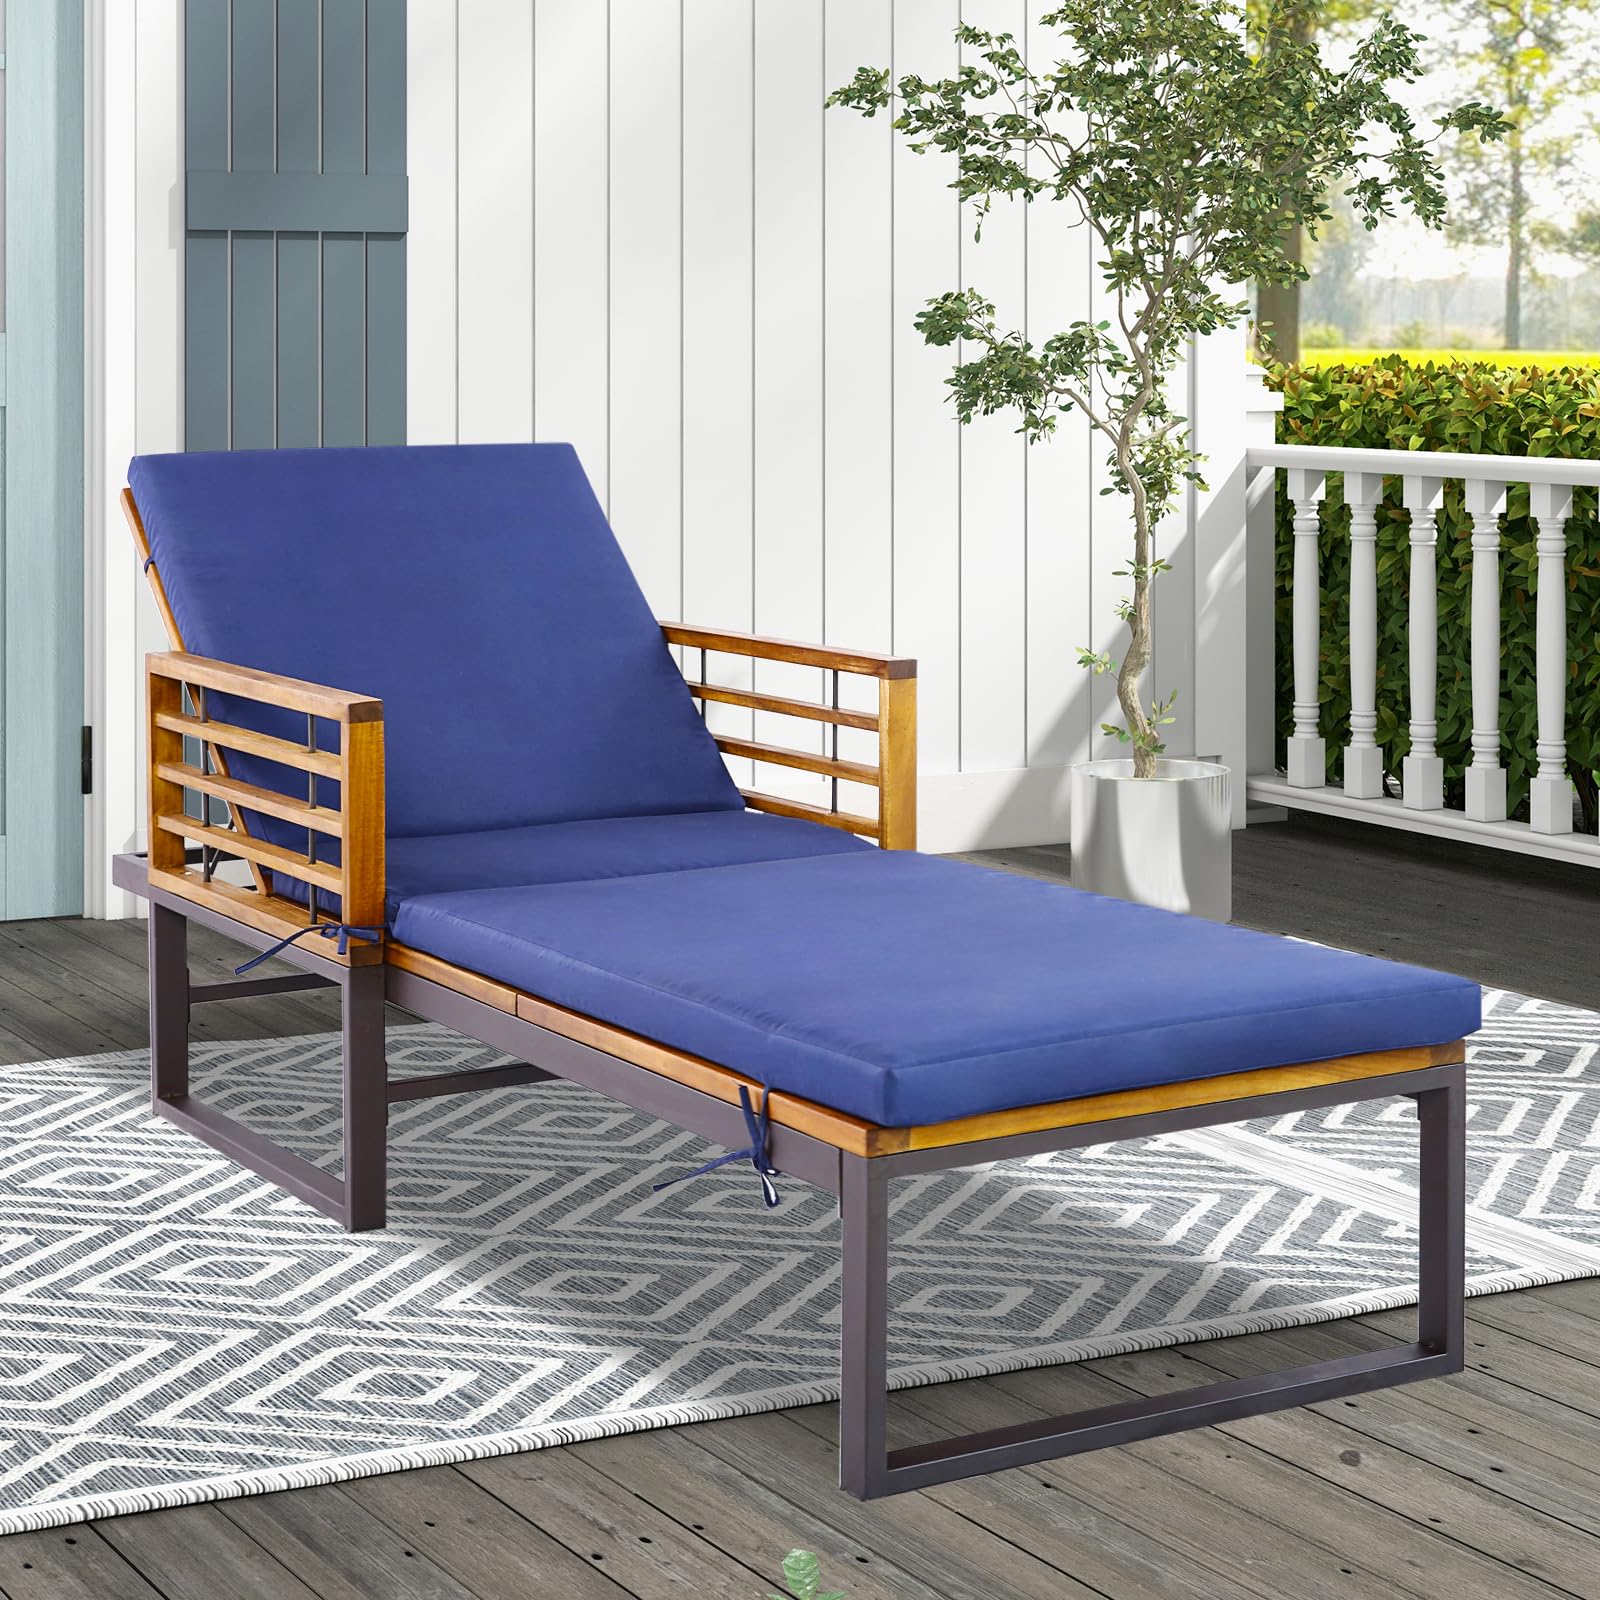 Tangkula Patio Chaise Lounge Chair with Cushion, Adjustable Reclining Pool Lounger with Acacia Wood and Metal Frame